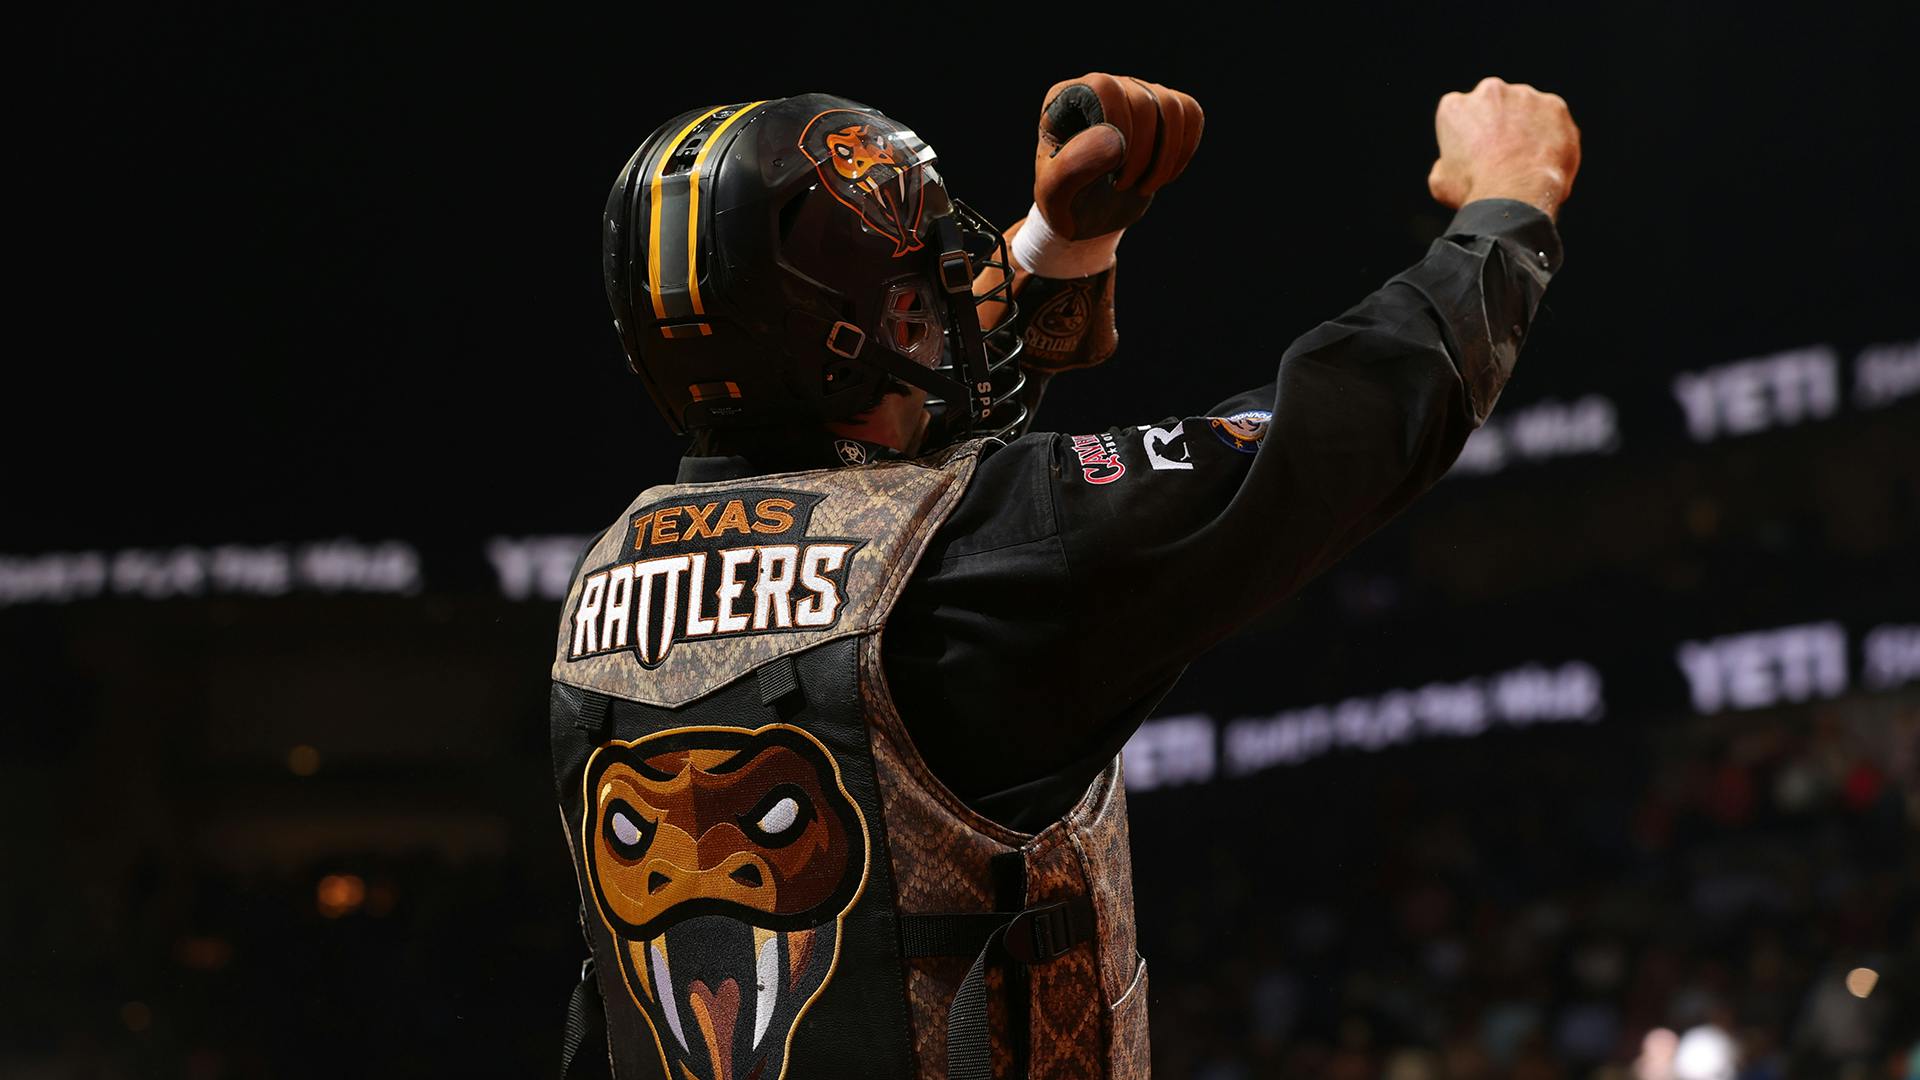 Rattlers-062424-1920x1080